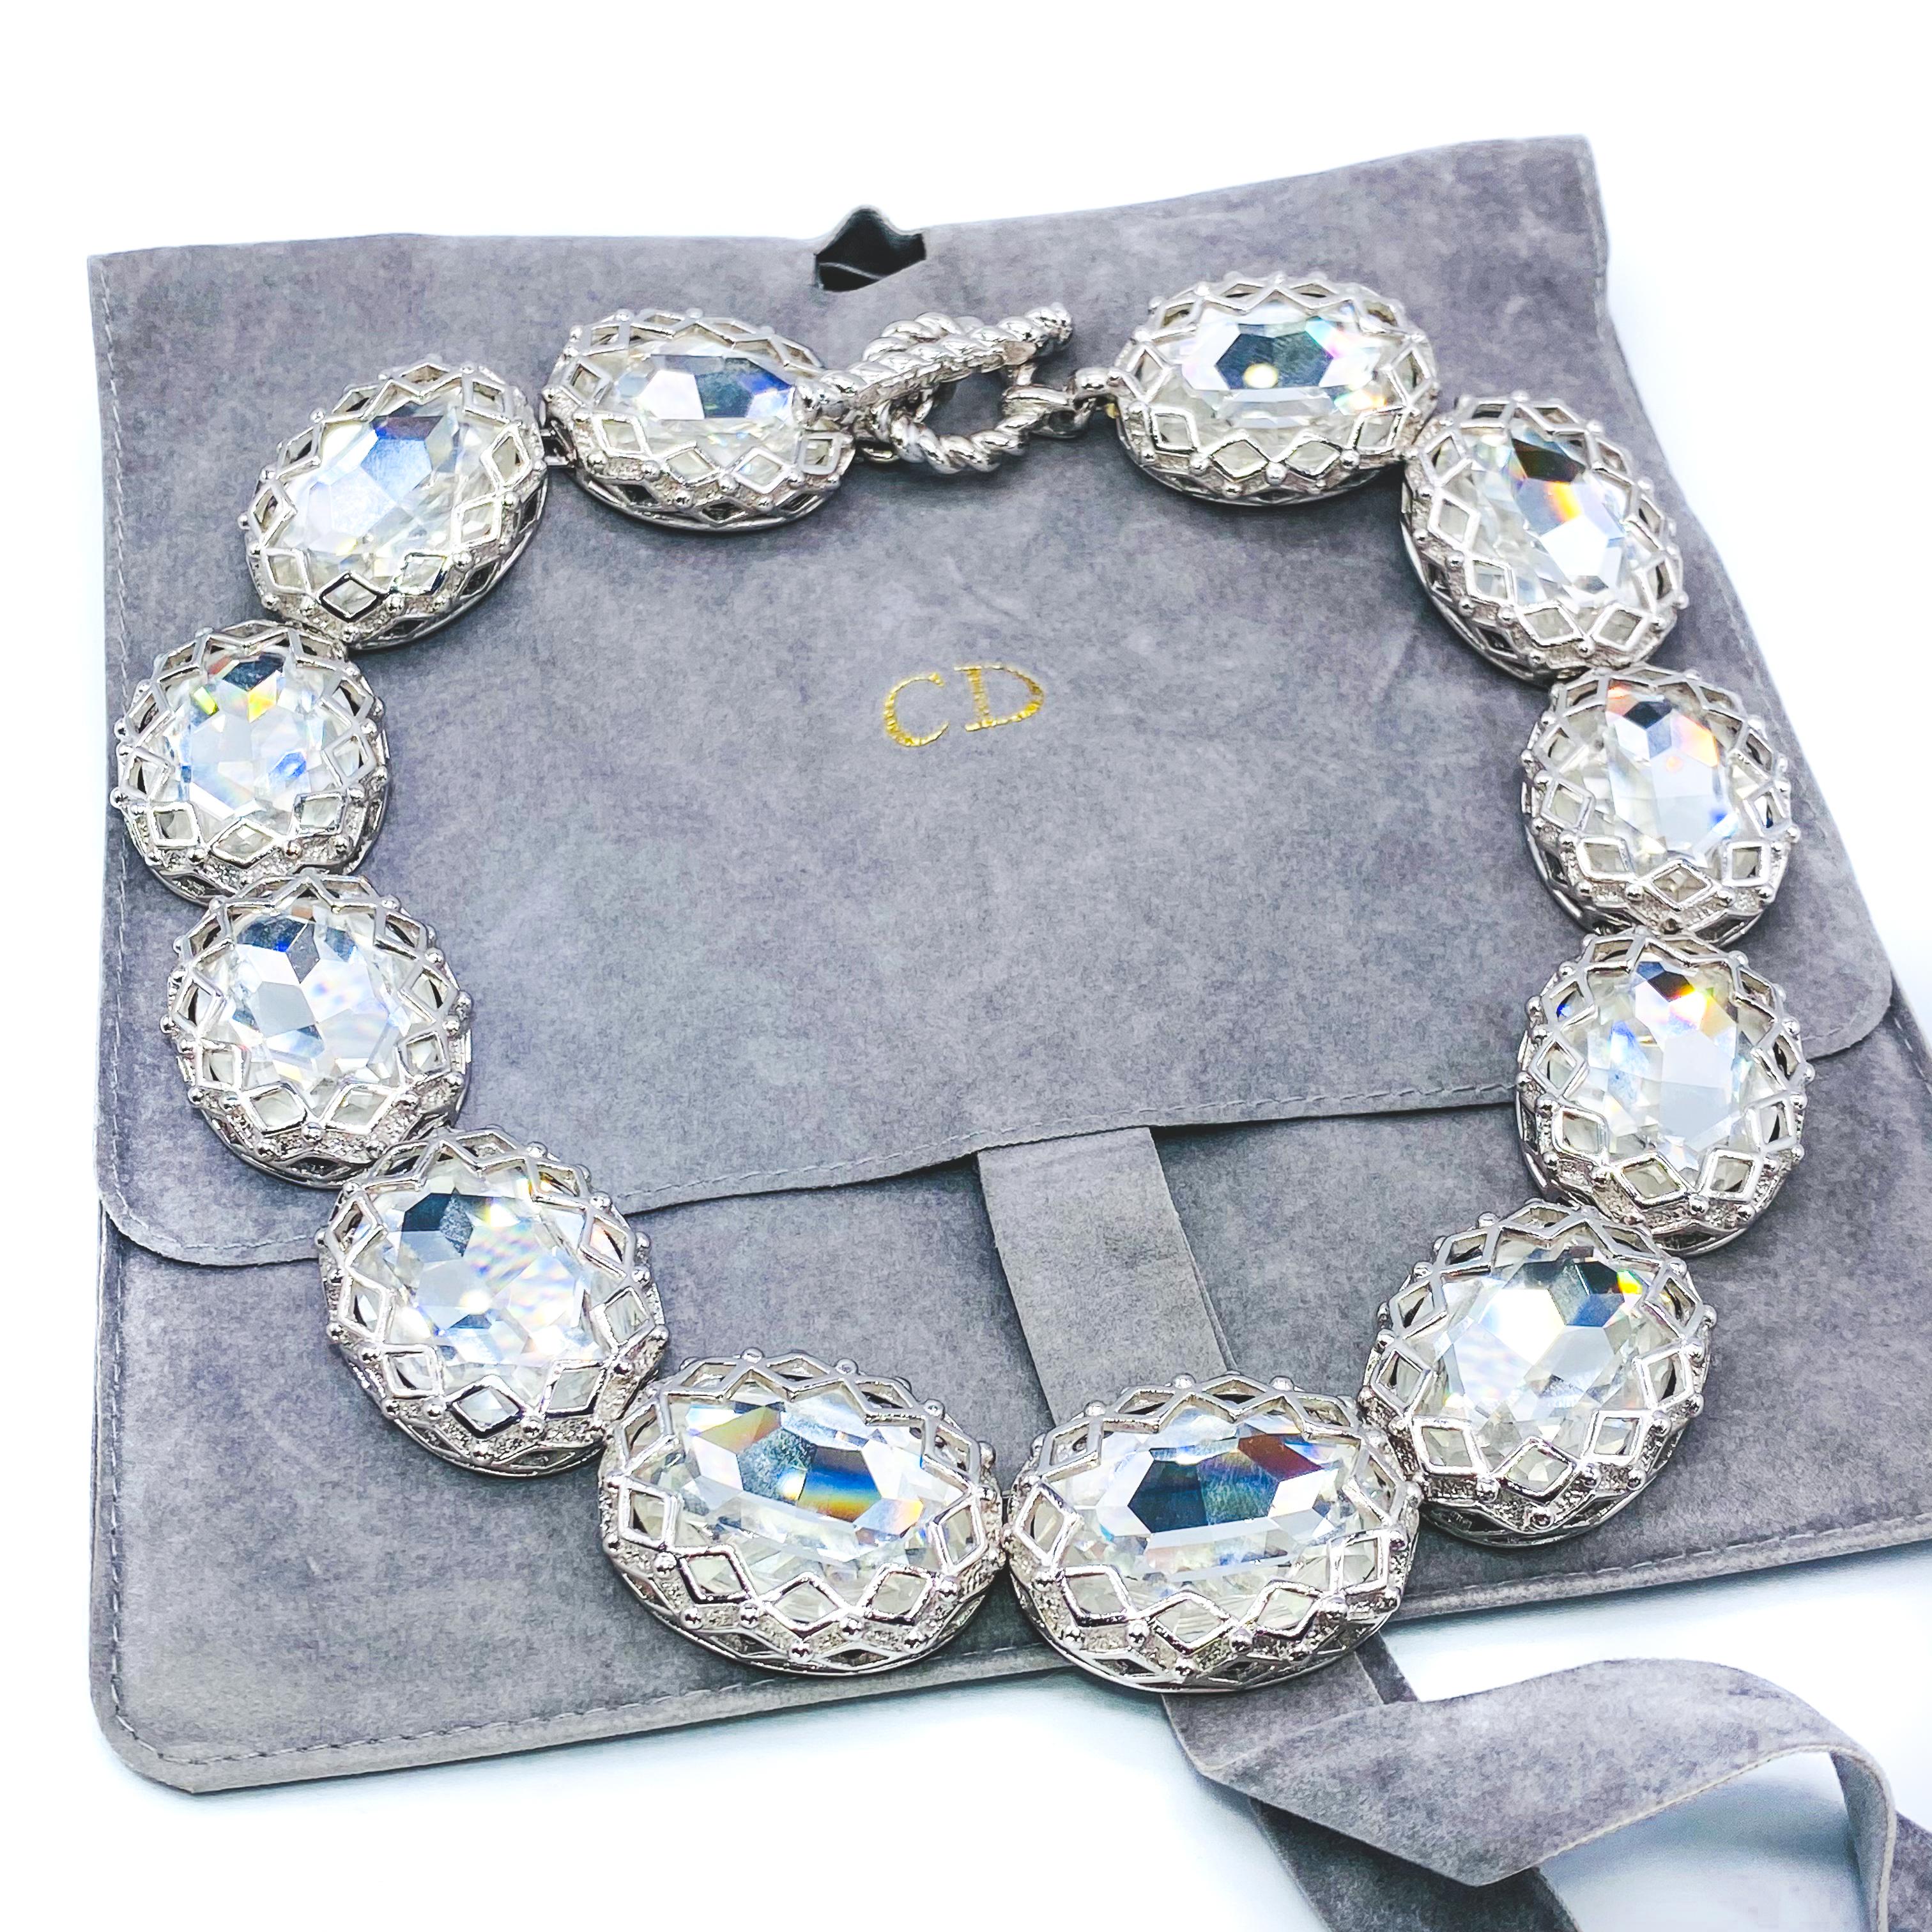 Christian Dior Vintage 1980s Crystal Collar Necklace

An incredible and rare statement piece from the Dior 80s archive

Detail
-Made in France in the 1980s
-Large oval cut crystals intricately set within rhodium plated metal 
-Stunning craftsmanship